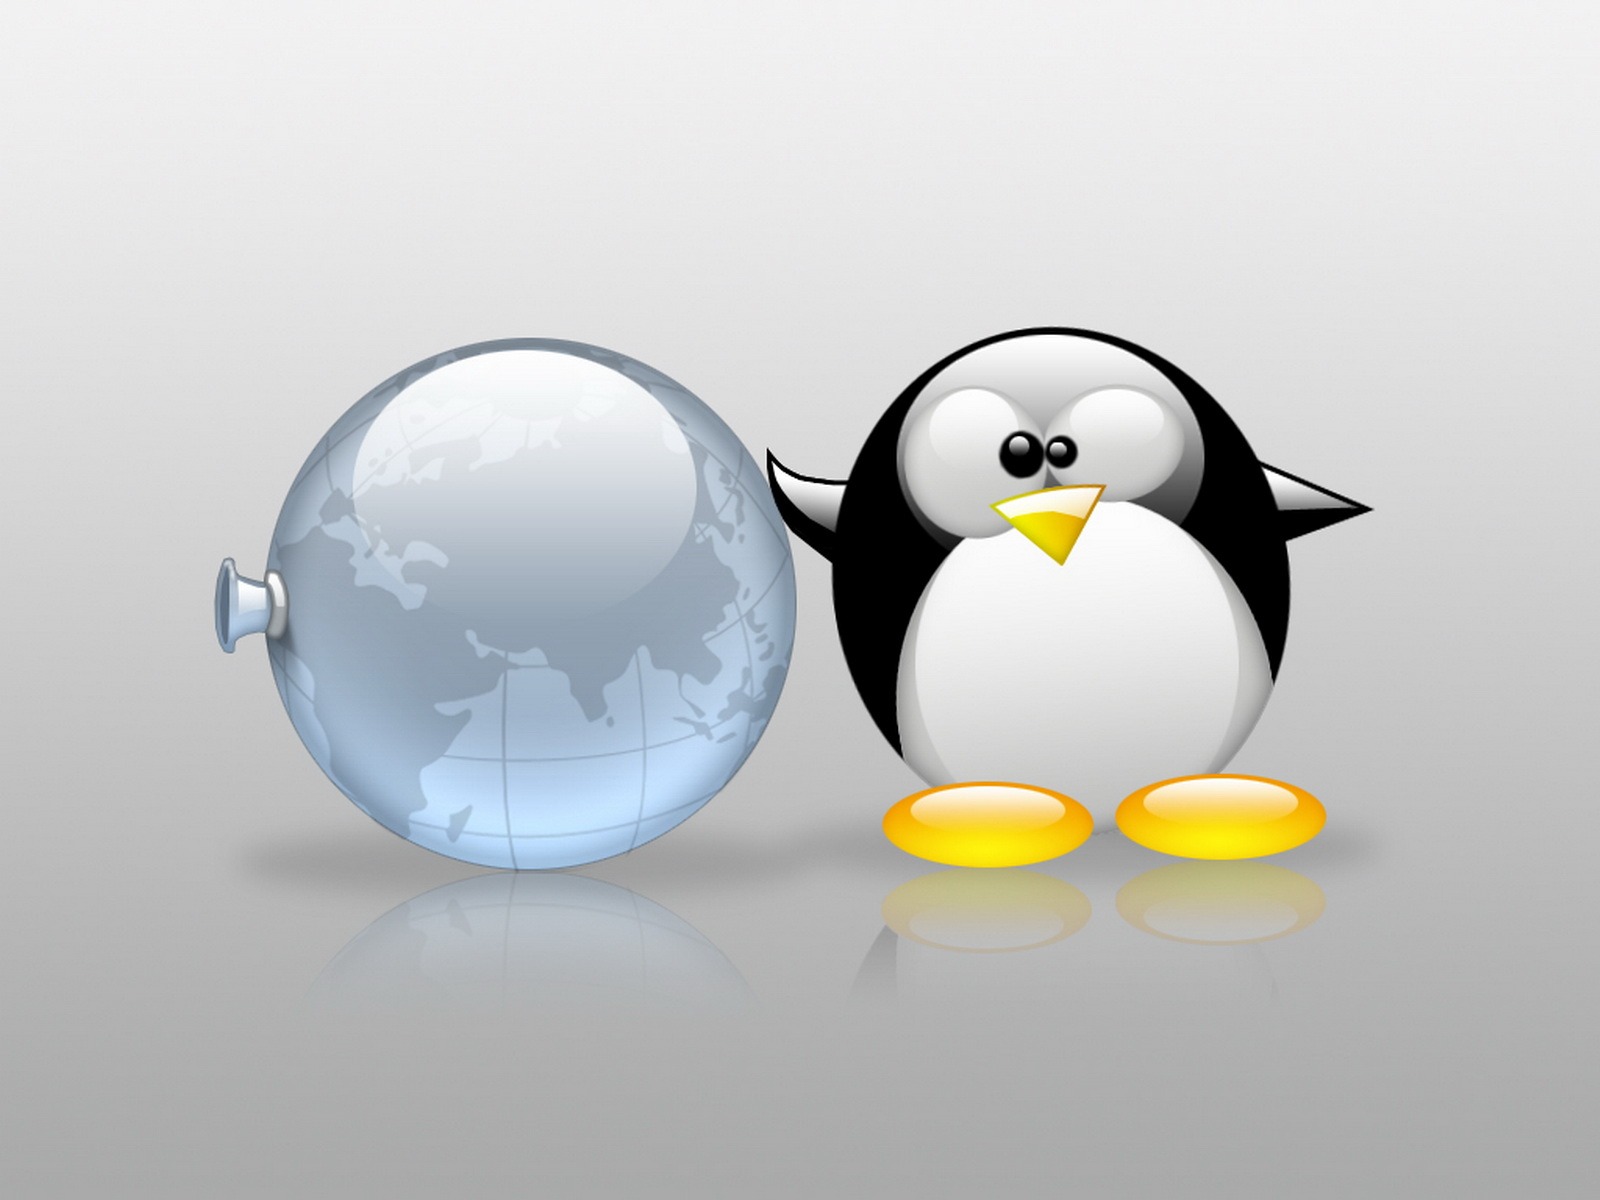 Linux tapety (2) #16 - 1600x1200